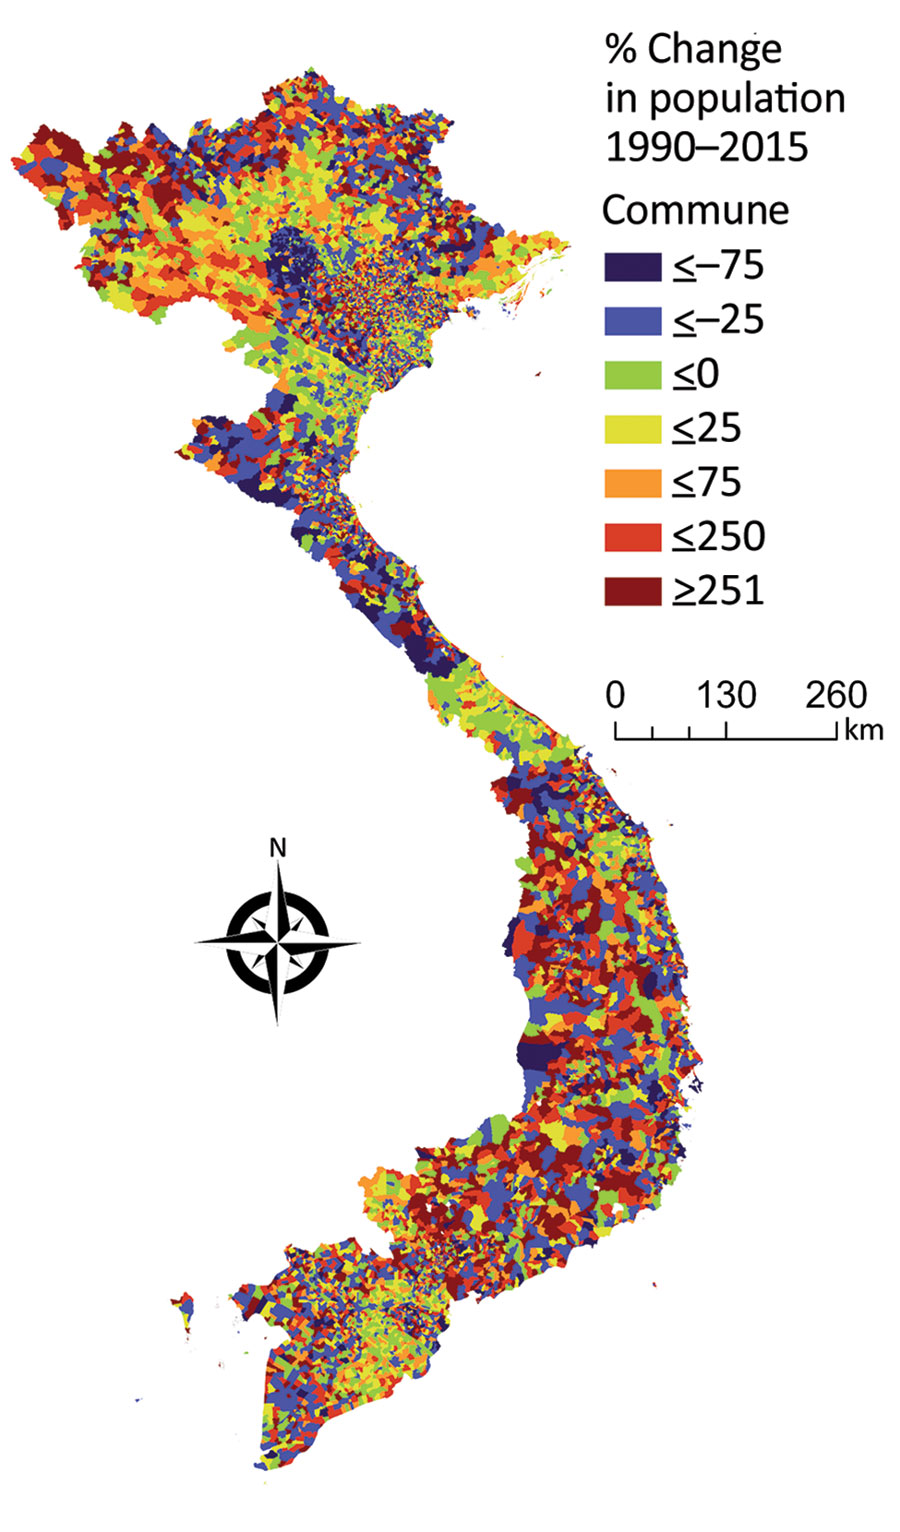 Percentage population change in the communes of Vietnam during 1990‒2015. Light blue, dark blue, and green values indicate communes that had population decreases, and yellow, orange, and red values indicate communes that had population growth.